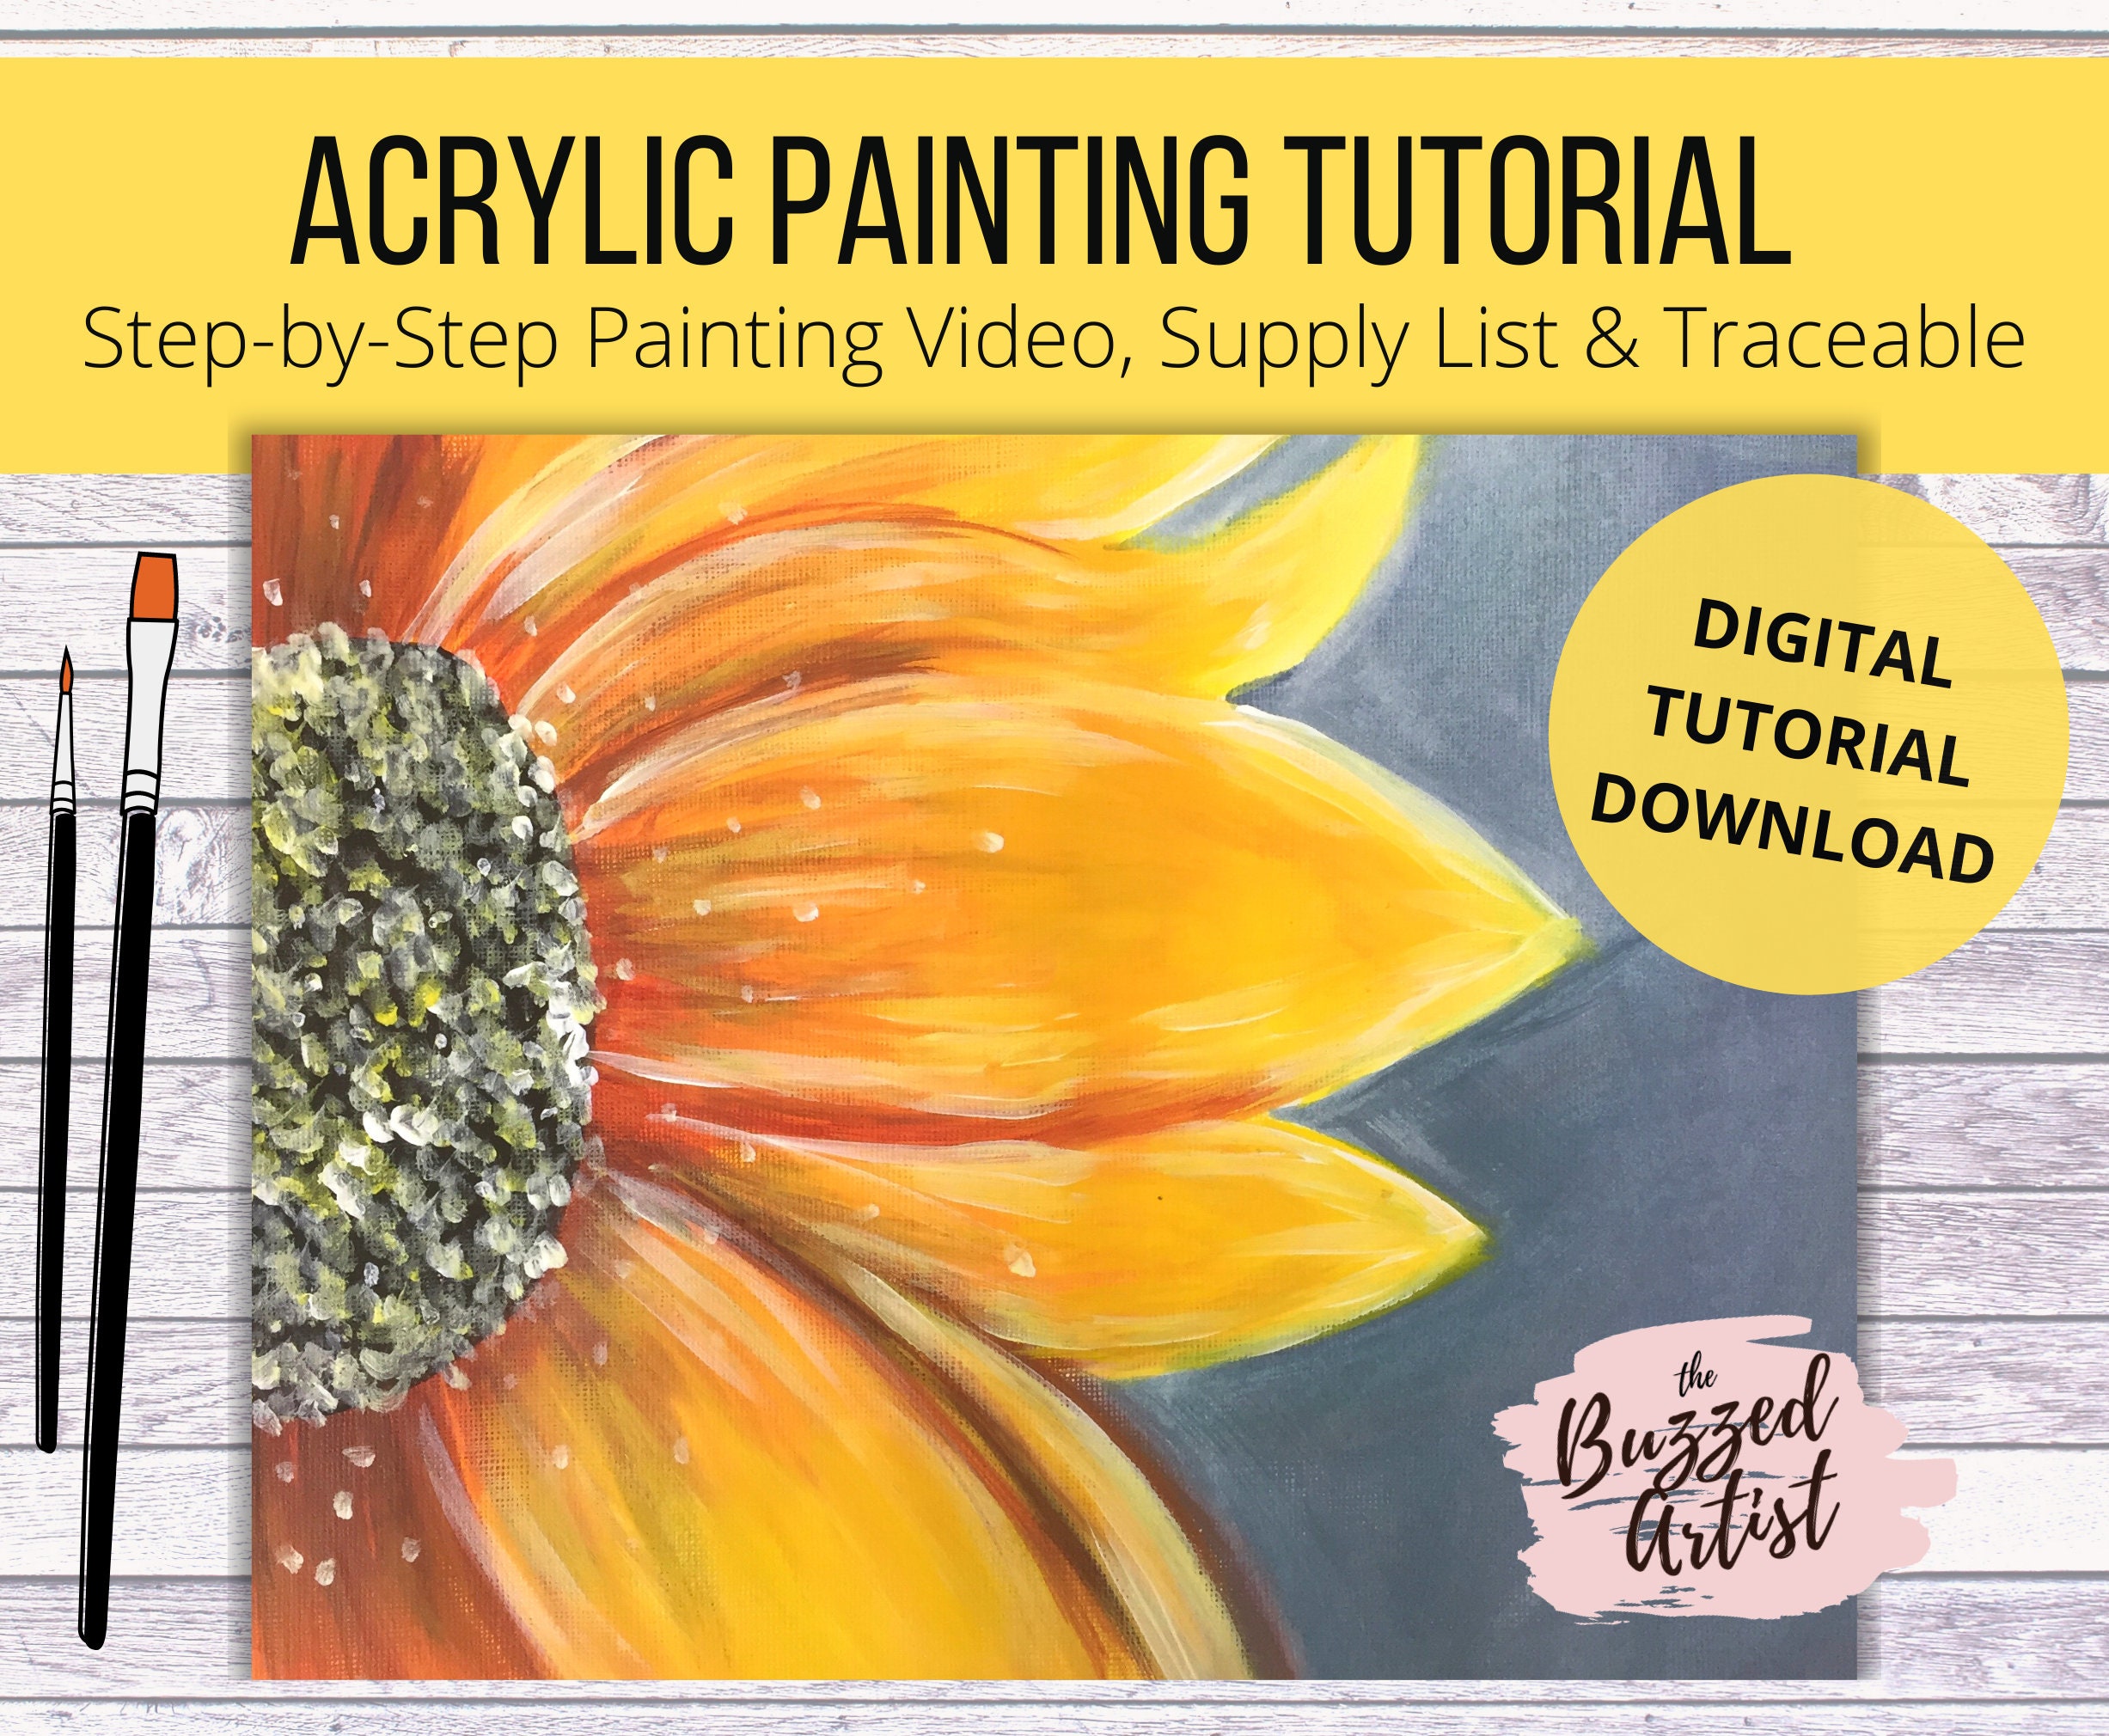 Comprehensive Acrylic Painting Tutorial for Beginners